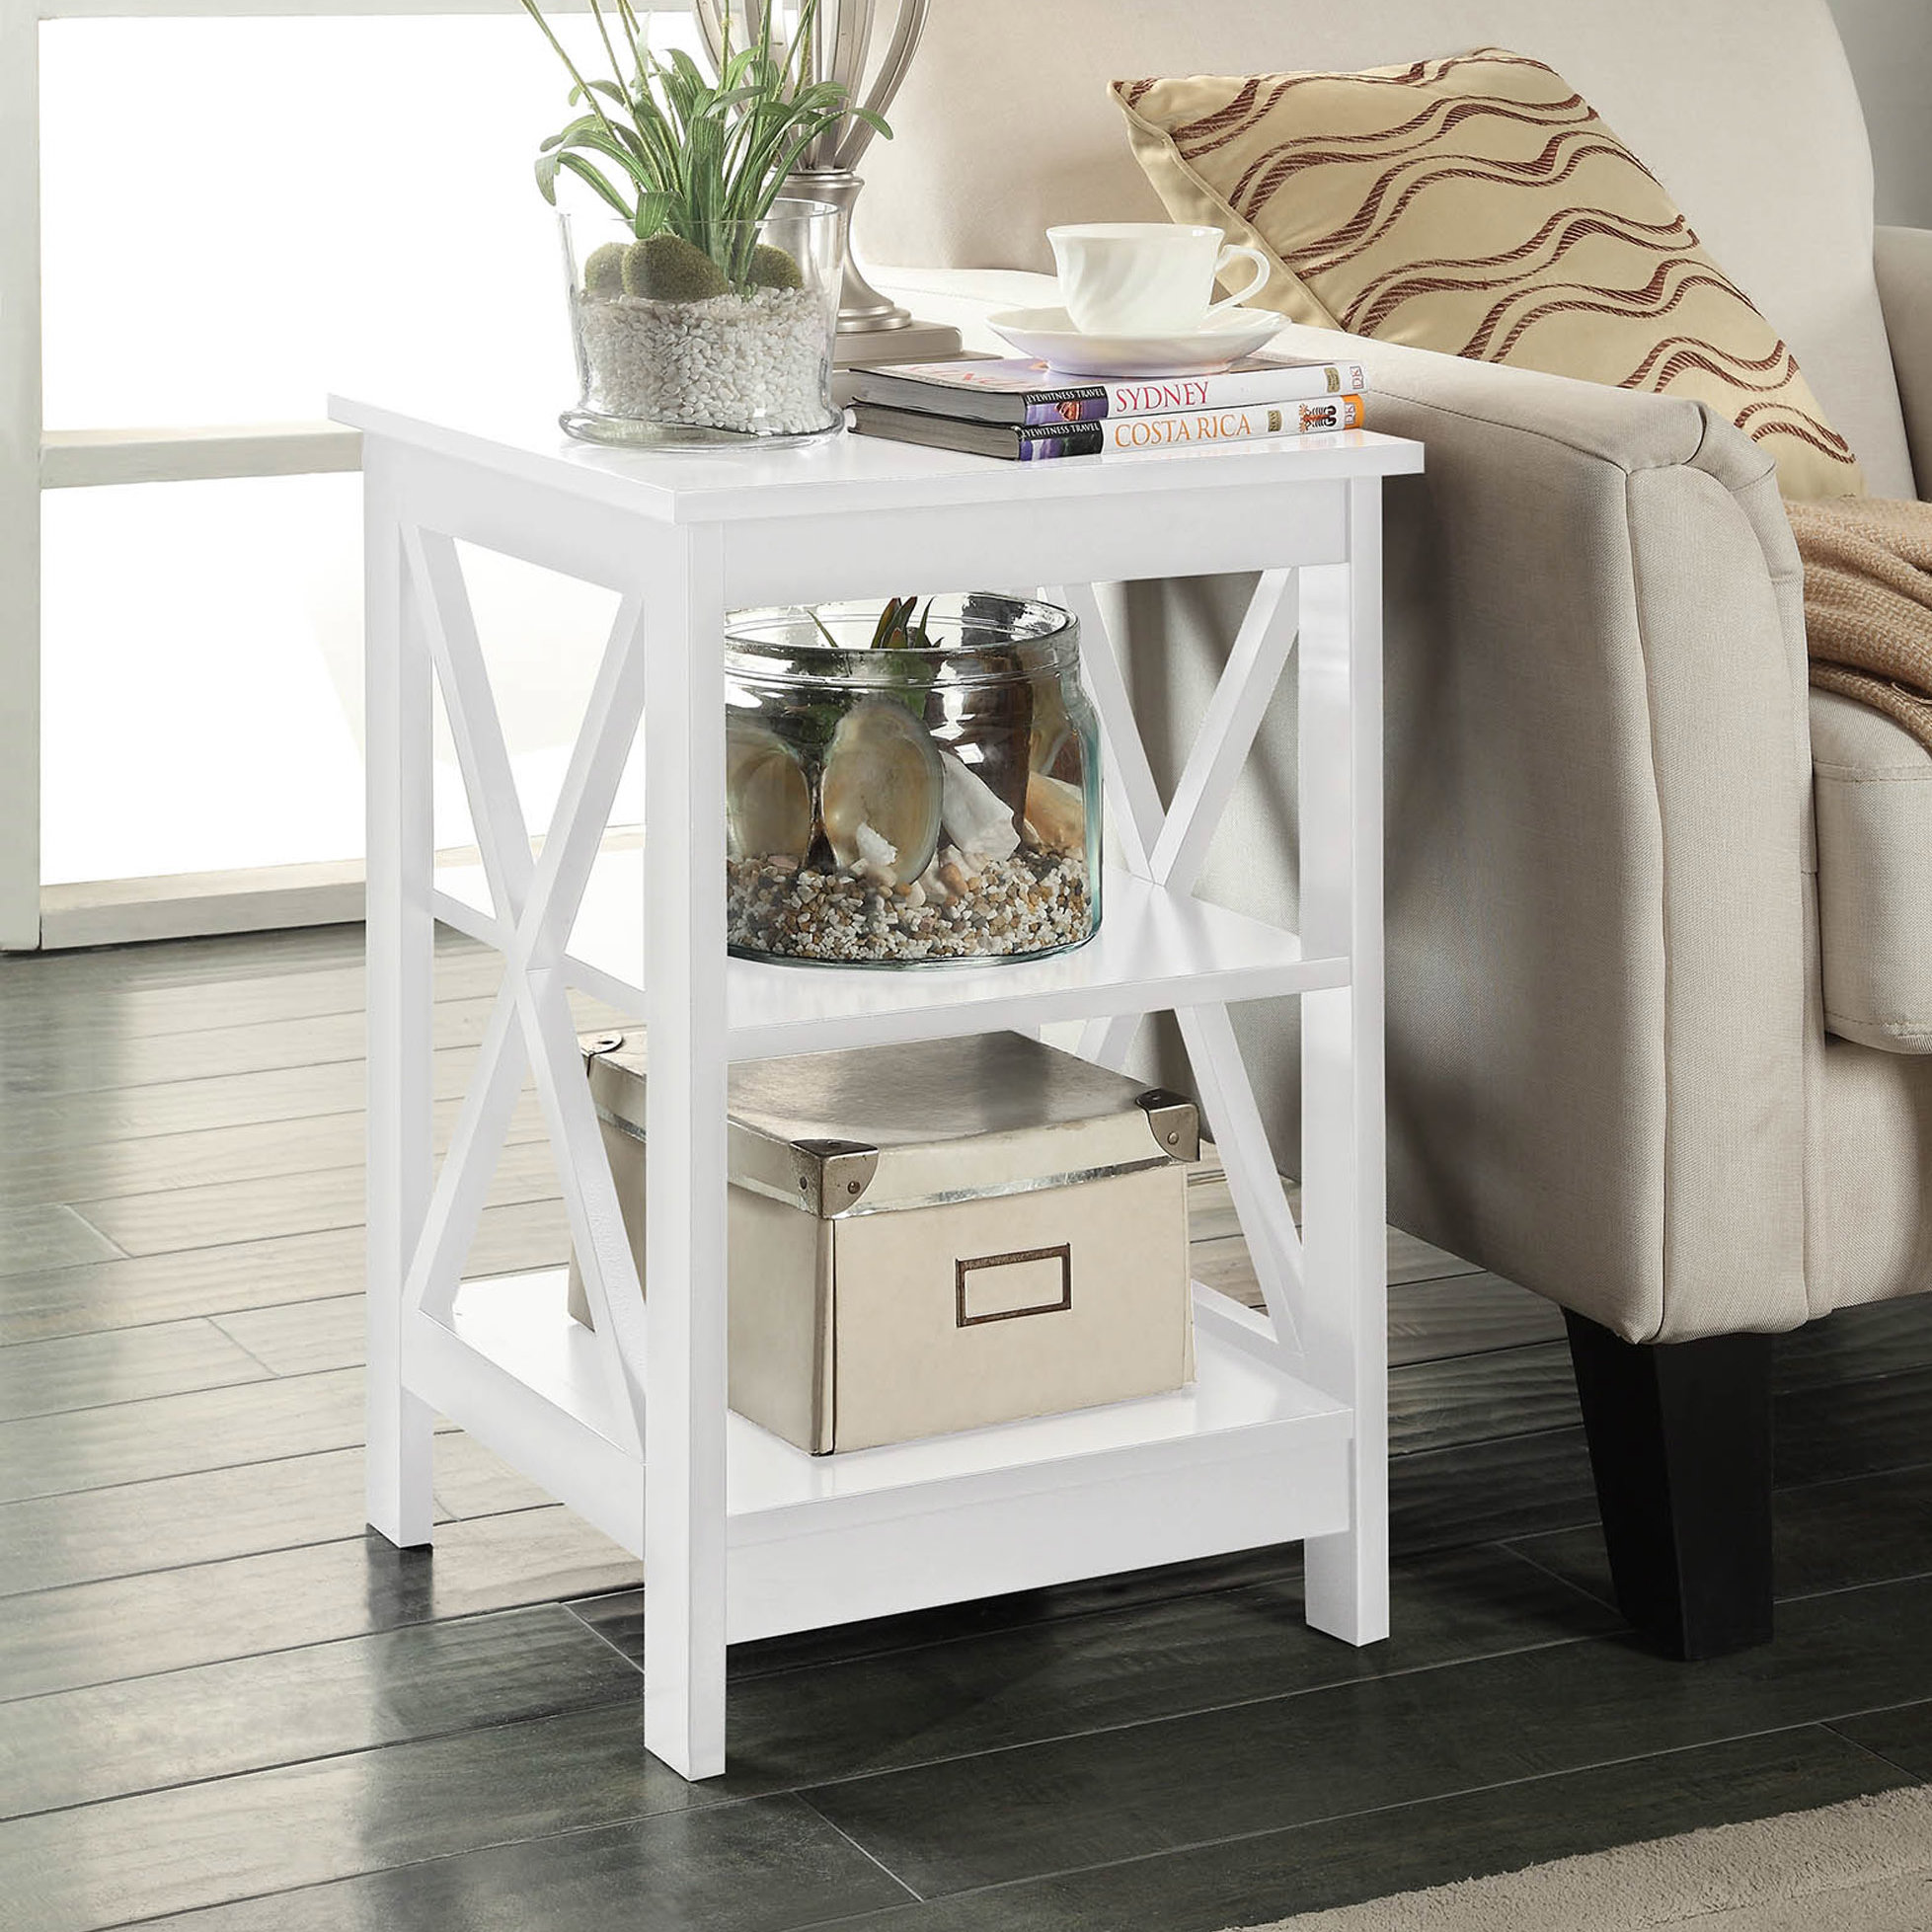 small white accent table stoneford end room essentials stacking quickview design plans decorative storage trunks bridal shower registry ideas shaped tall nightstand navy blue lamp